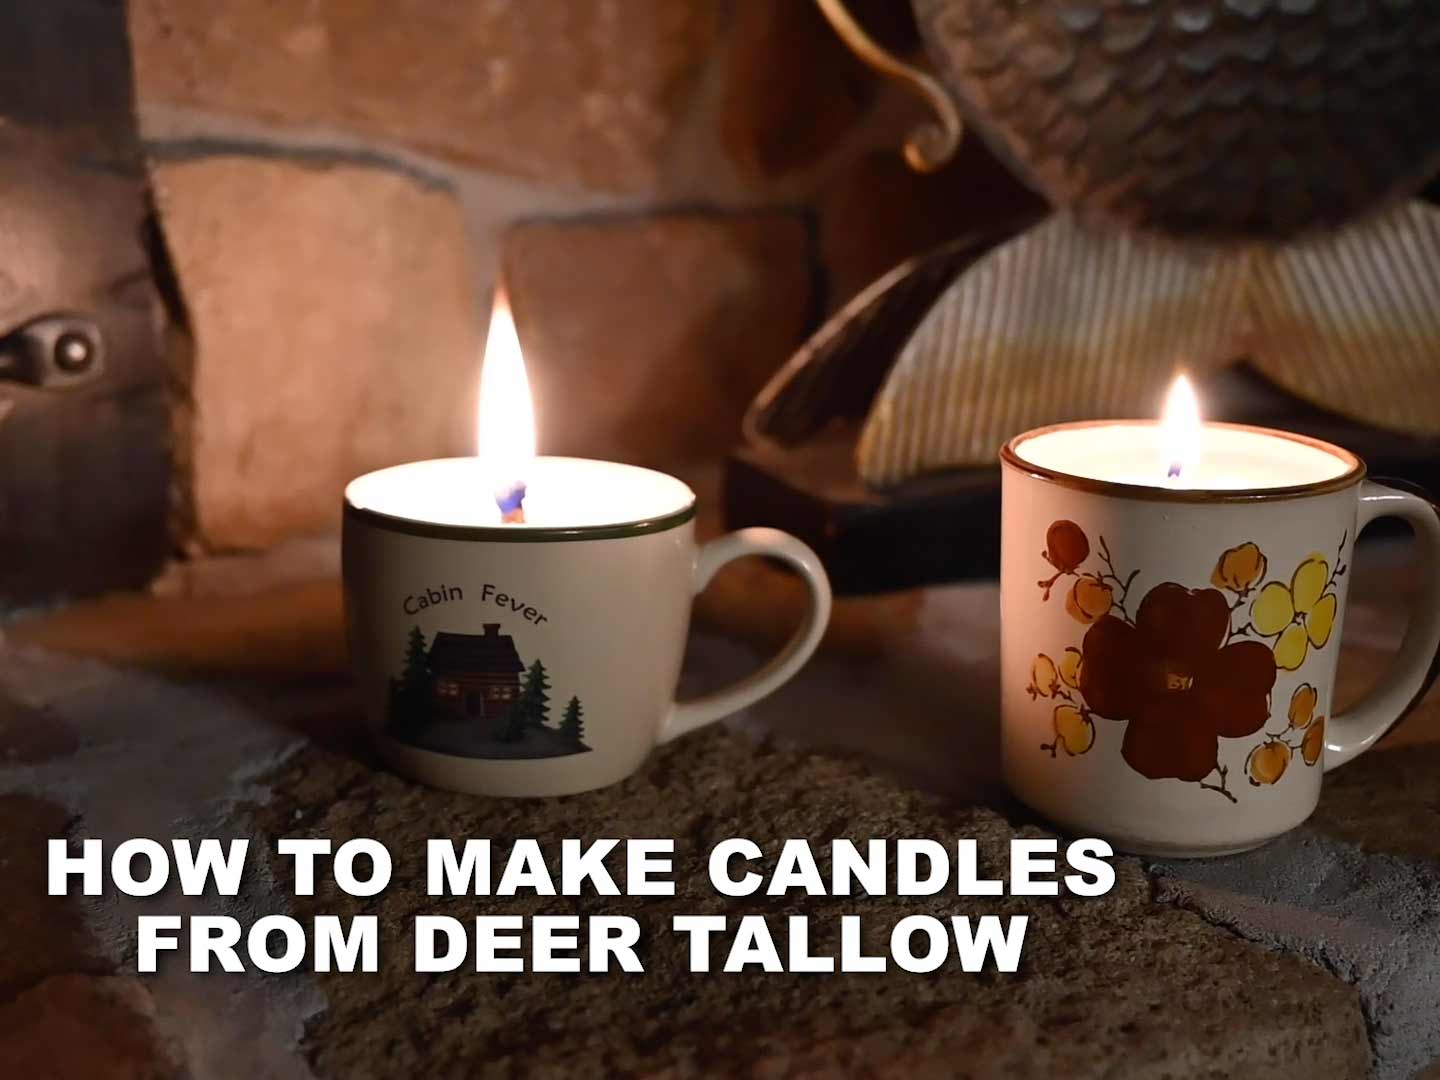 How to make candles from deer tallow.